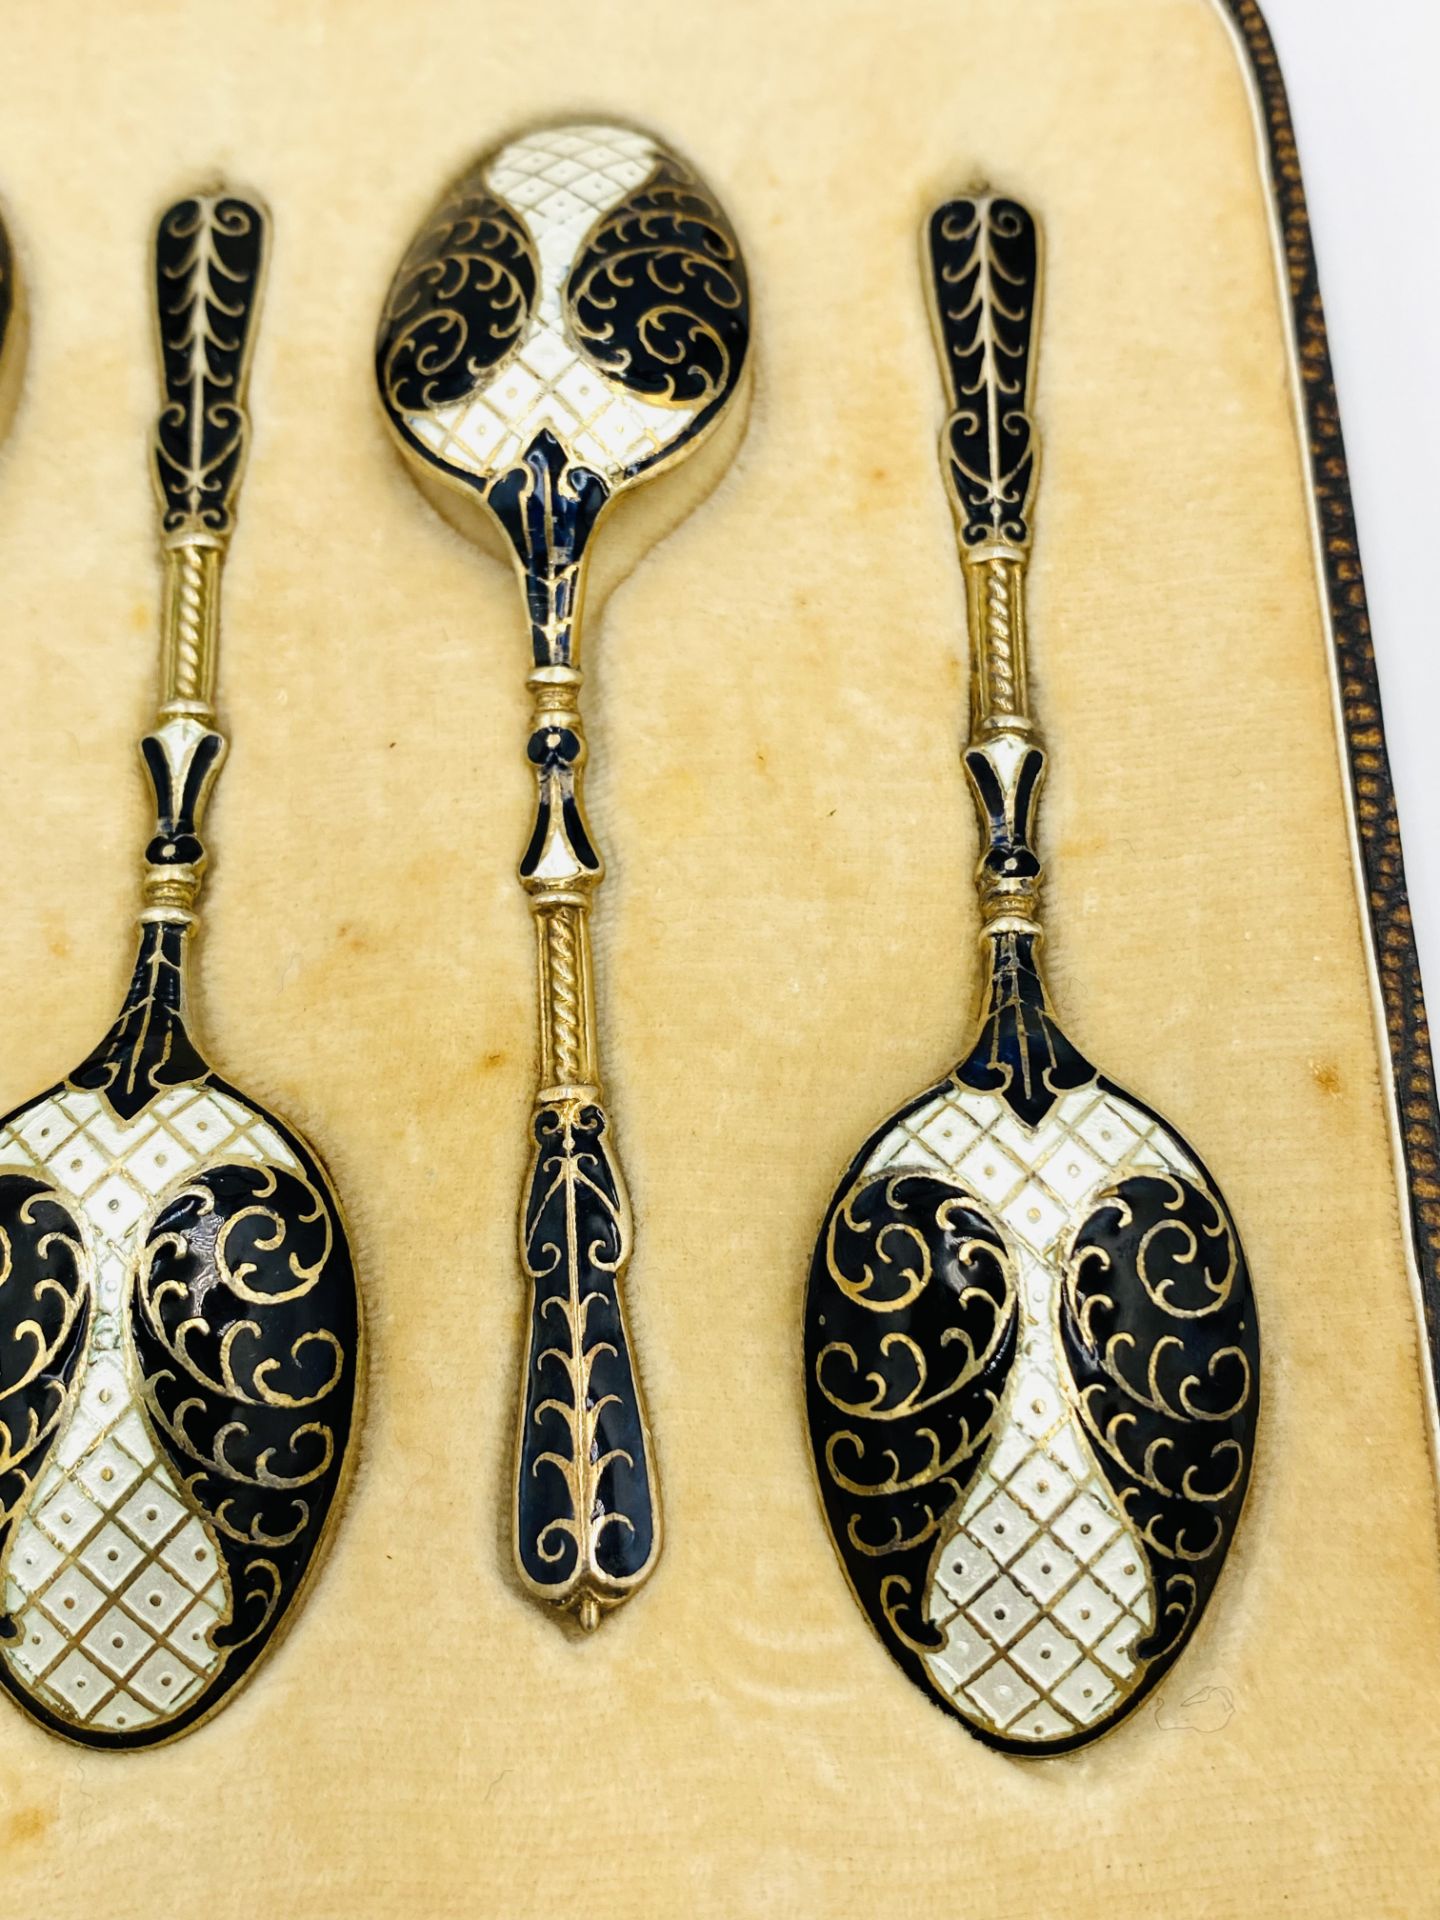 Boxed set of six silver and enamel tea spoons - Image 5 of 5